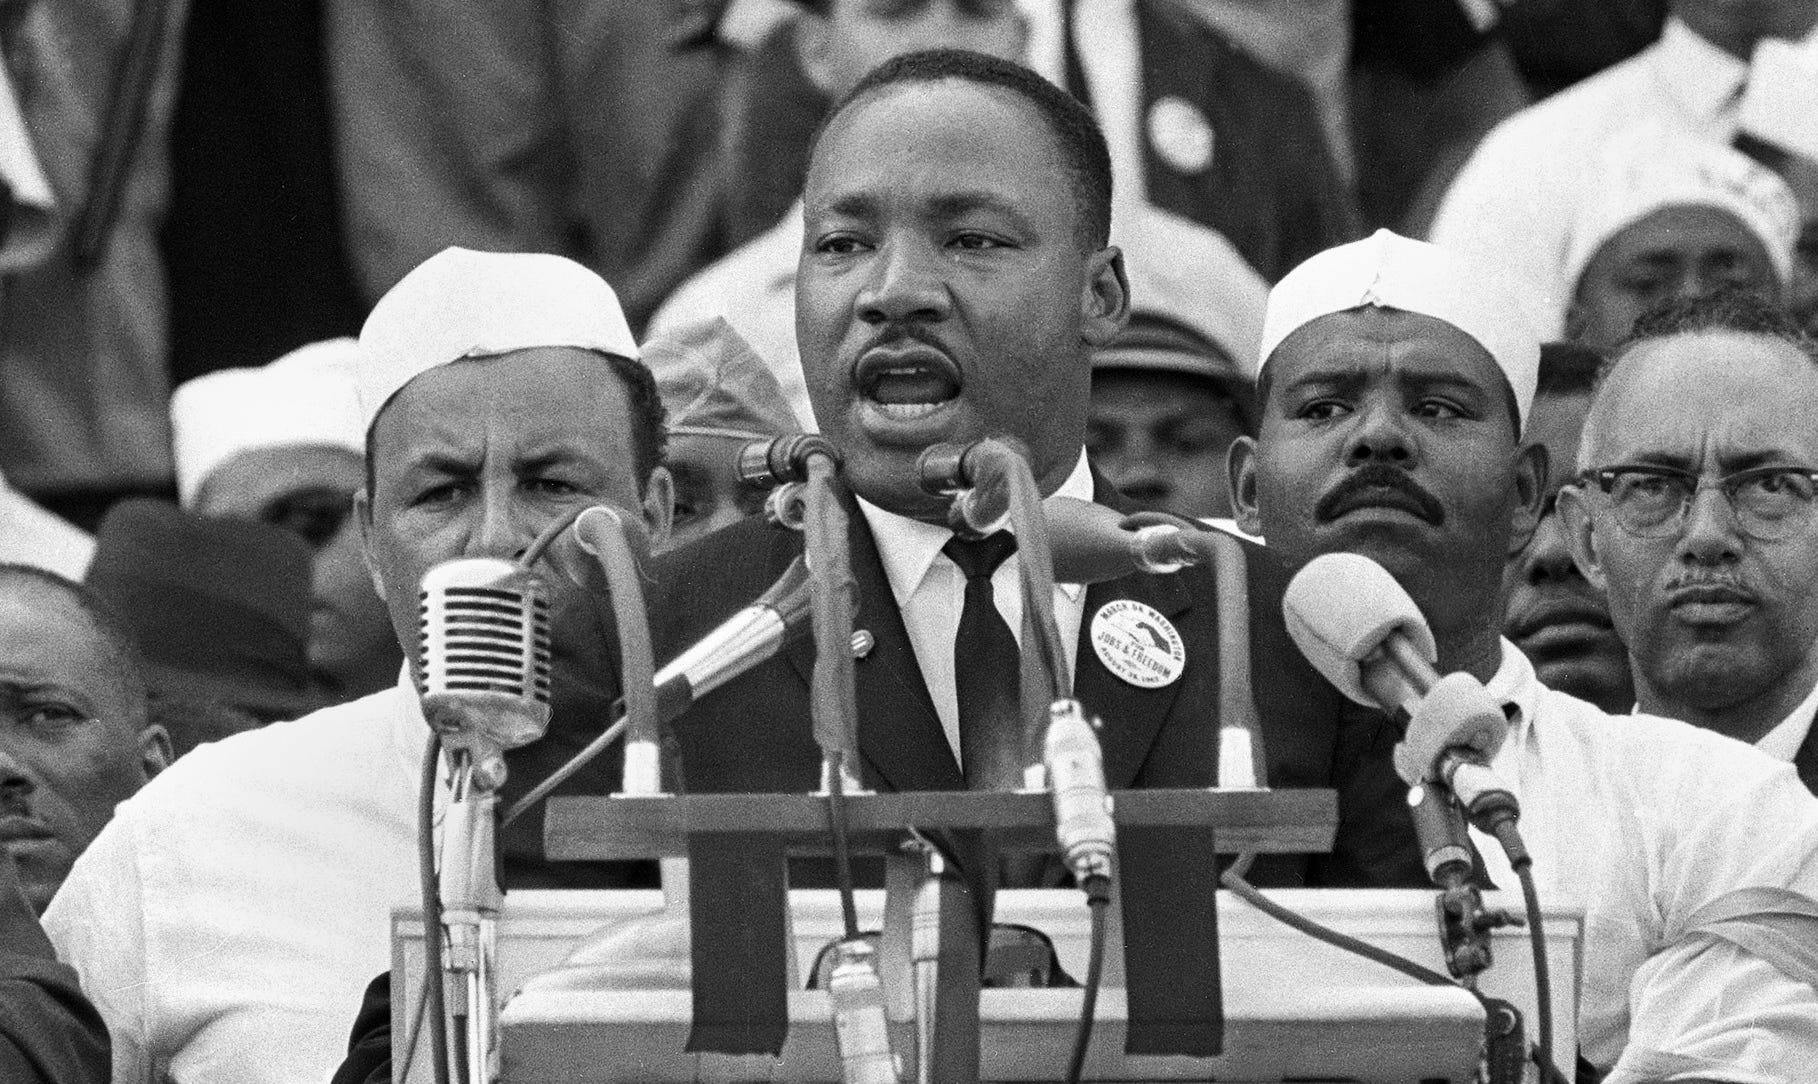 In this Aug. 28, 1963 file photo, Dr. Martin Luther King Jr., head of the Southern Christian Leadership Conference, addresses marchers during his "I Have a Dream" speech at the Lincoln Memorial in Washington.